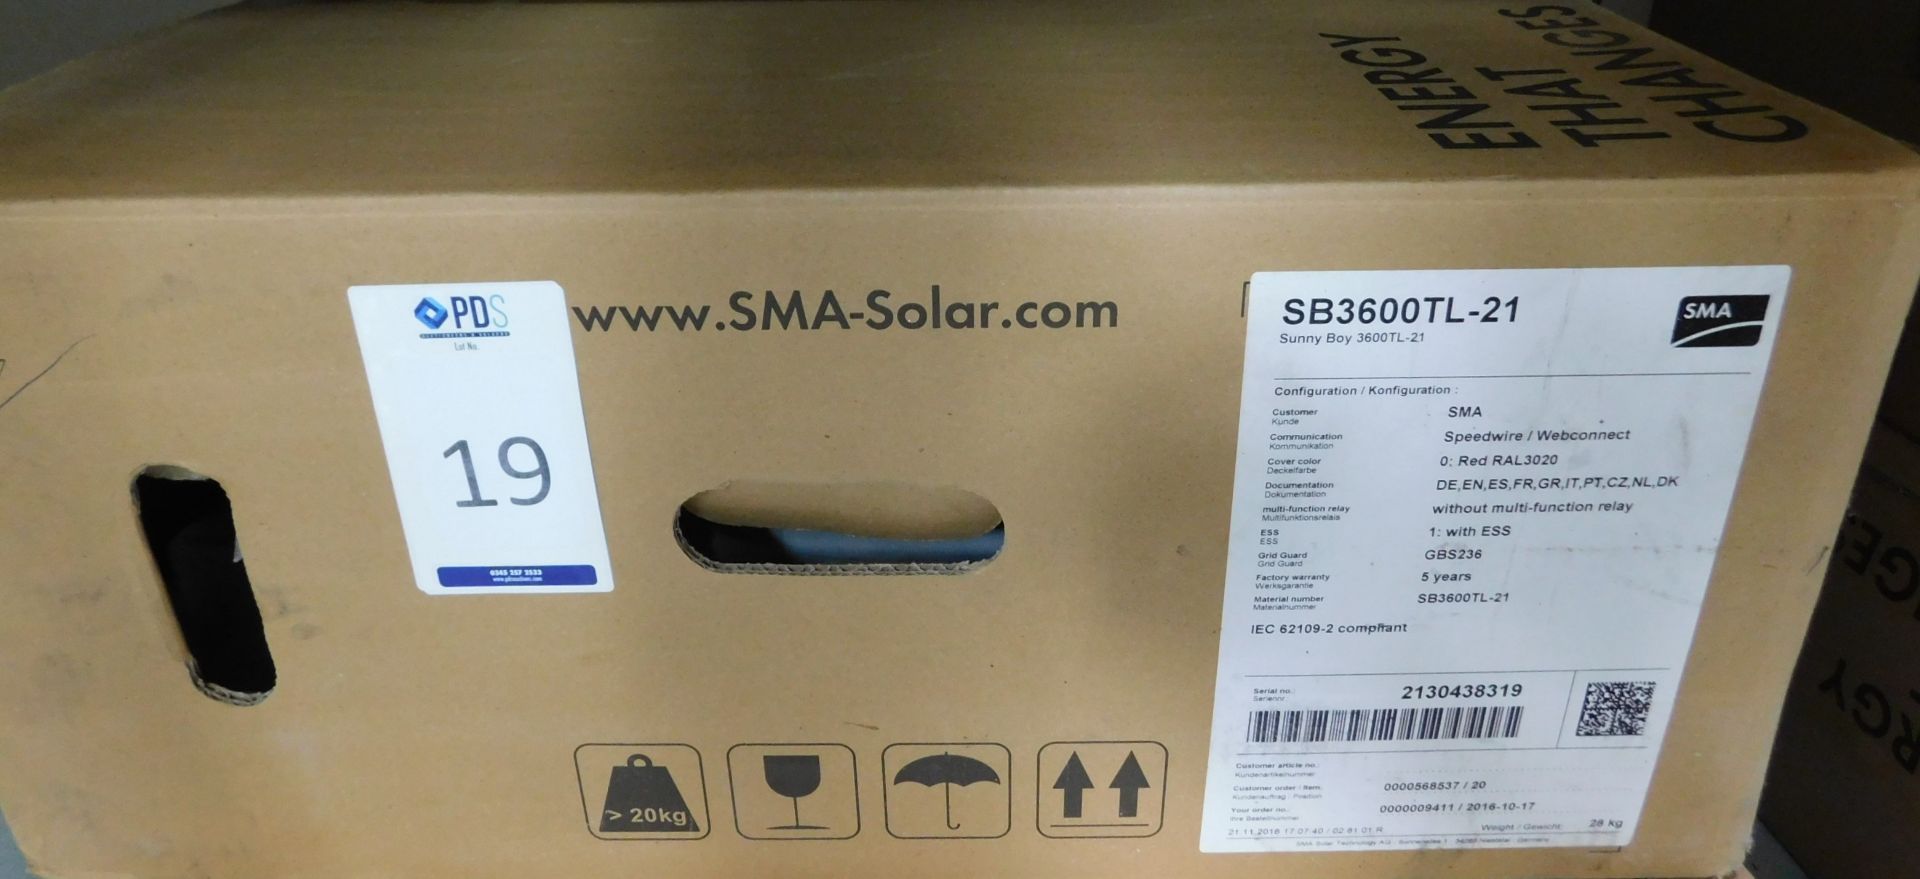 SMA “Sunny Boy” SB3600TL-21 Solar Inverter (New & Boxed) (Location: Brentwood: Please Refer to